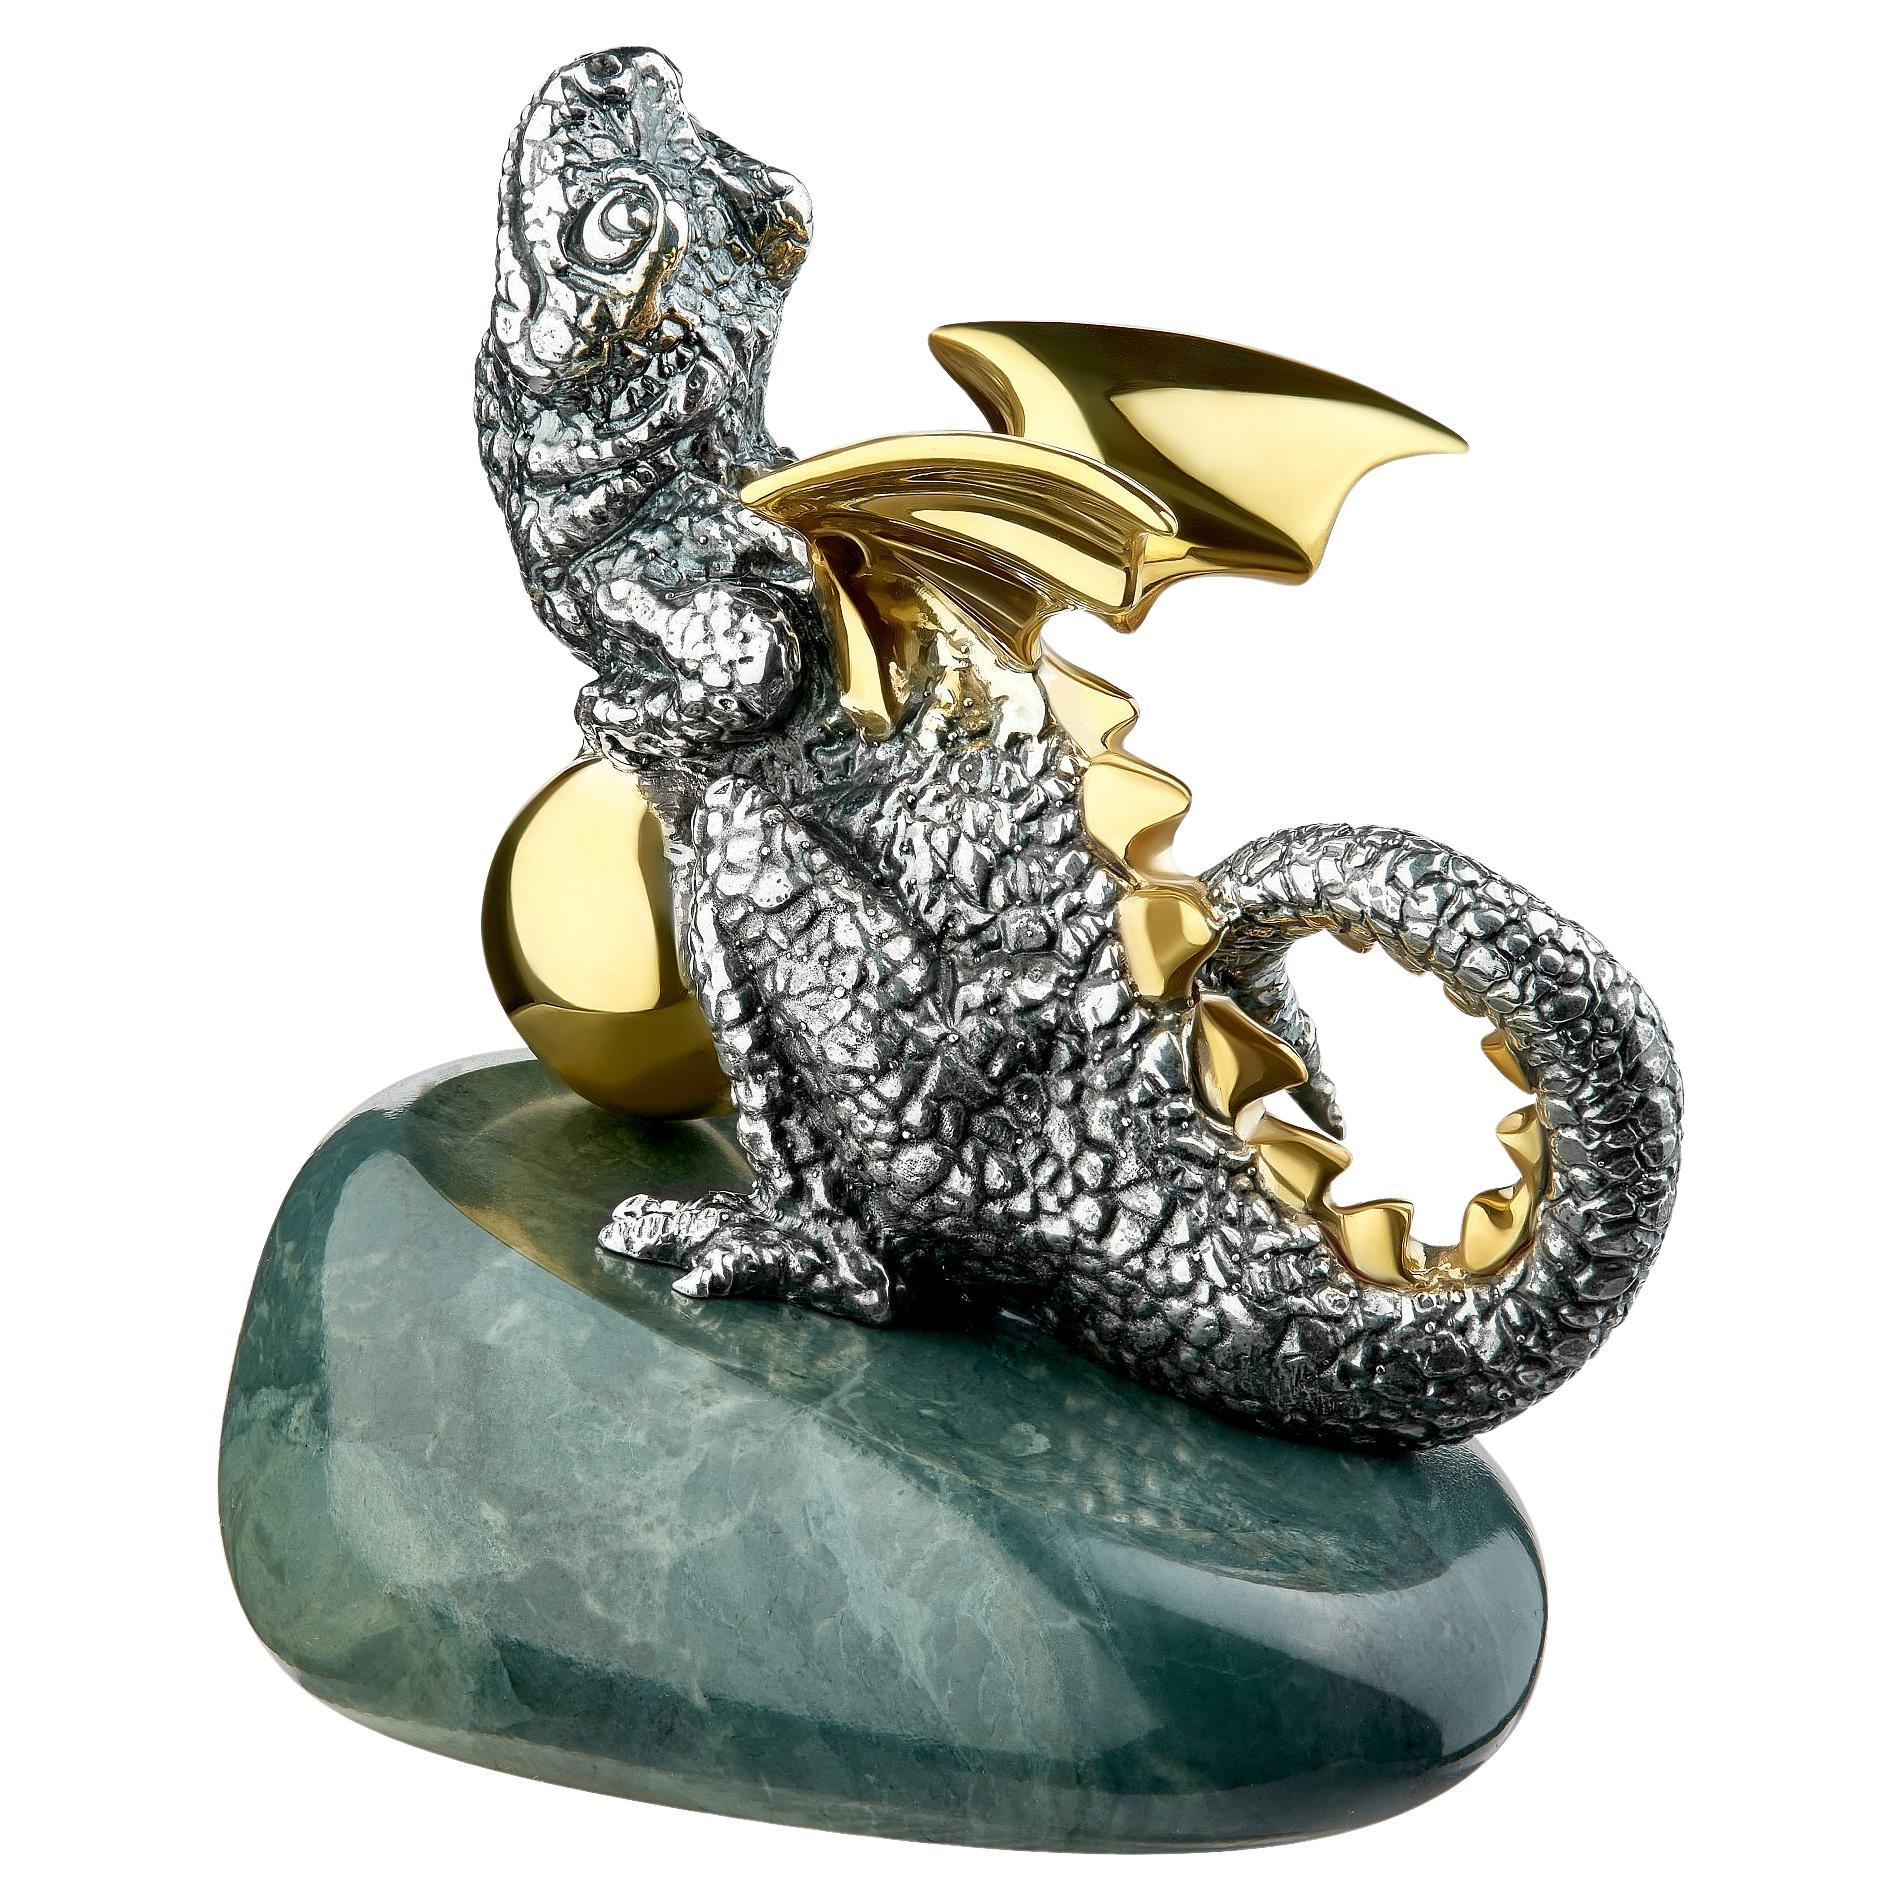 SV Gold Plated Dragon Miniature for Gift and Talisman